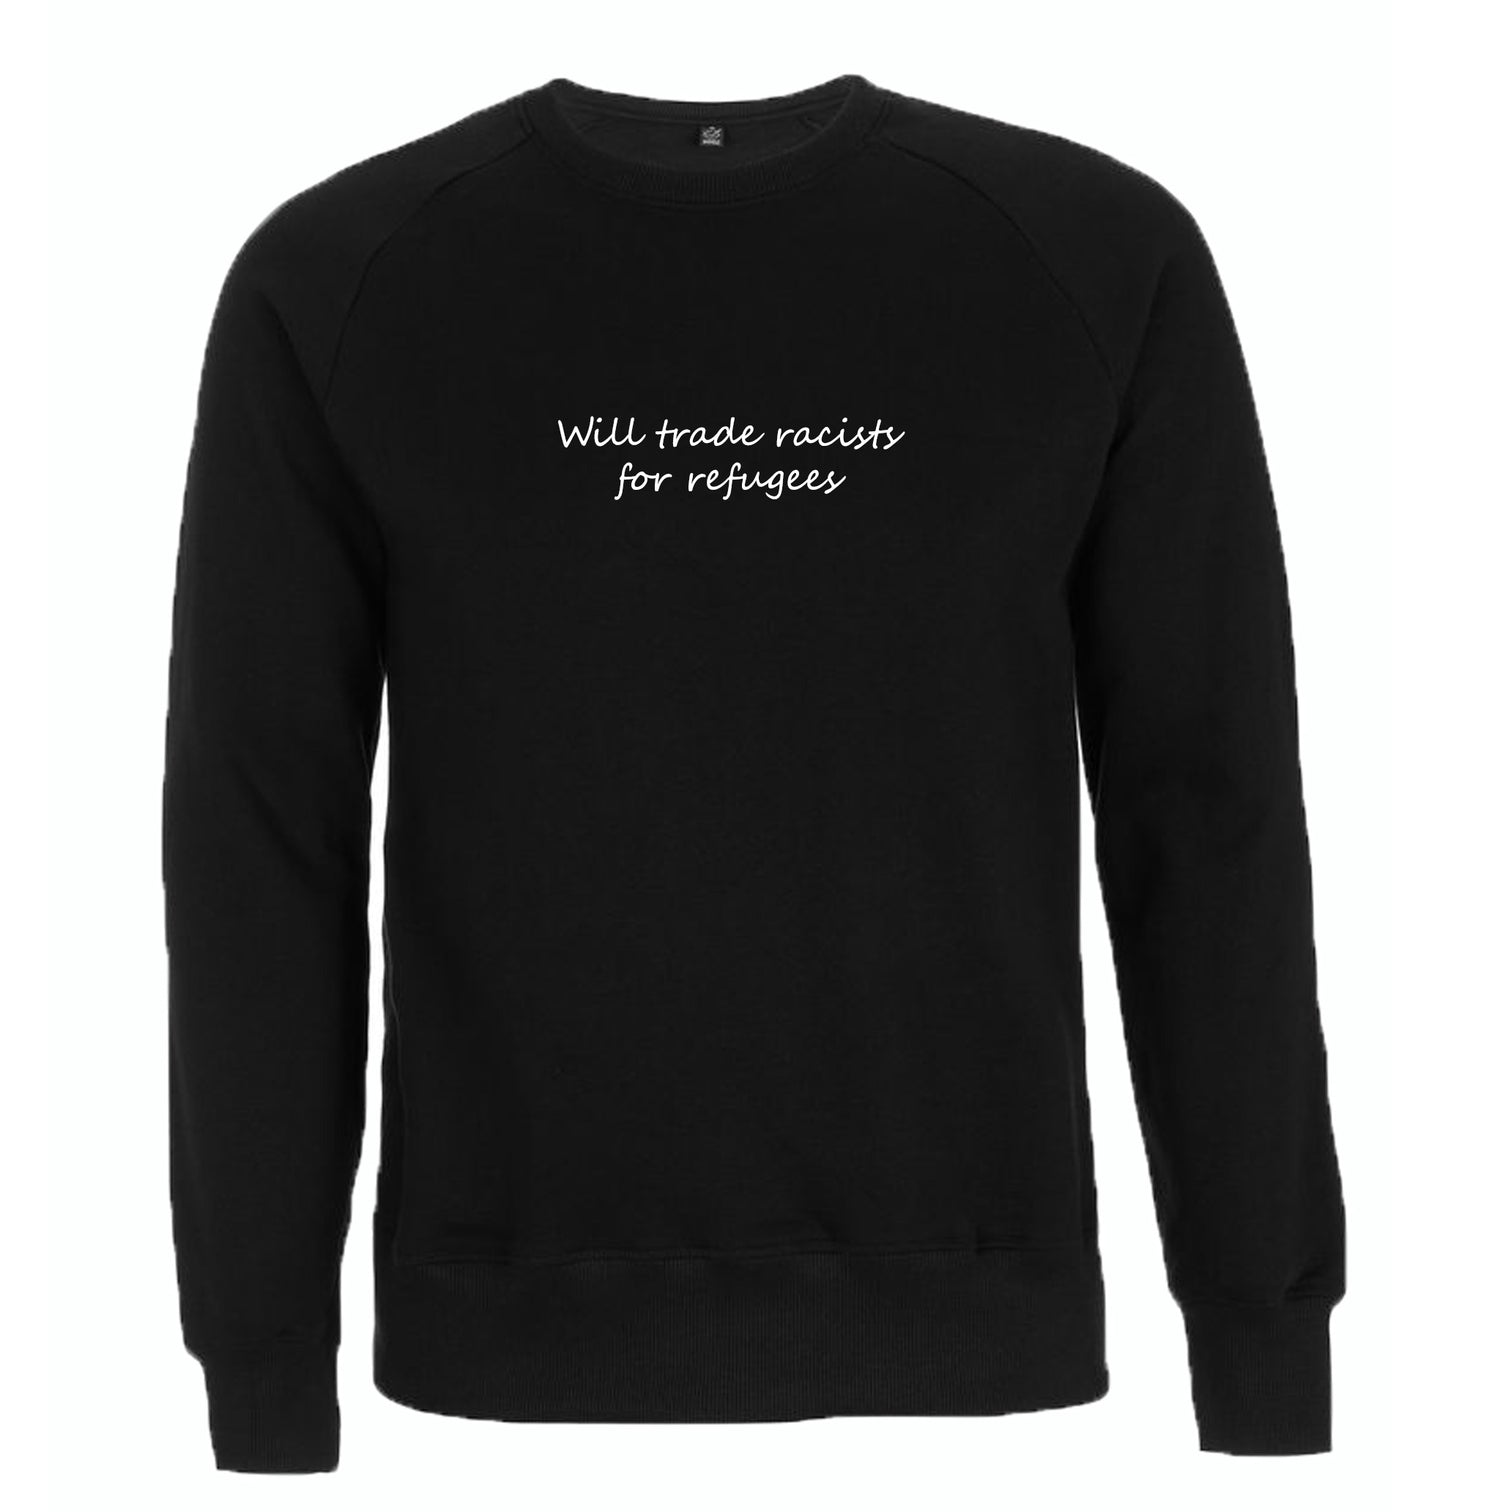 Will trade racists for refugees Organic Sweatshirt